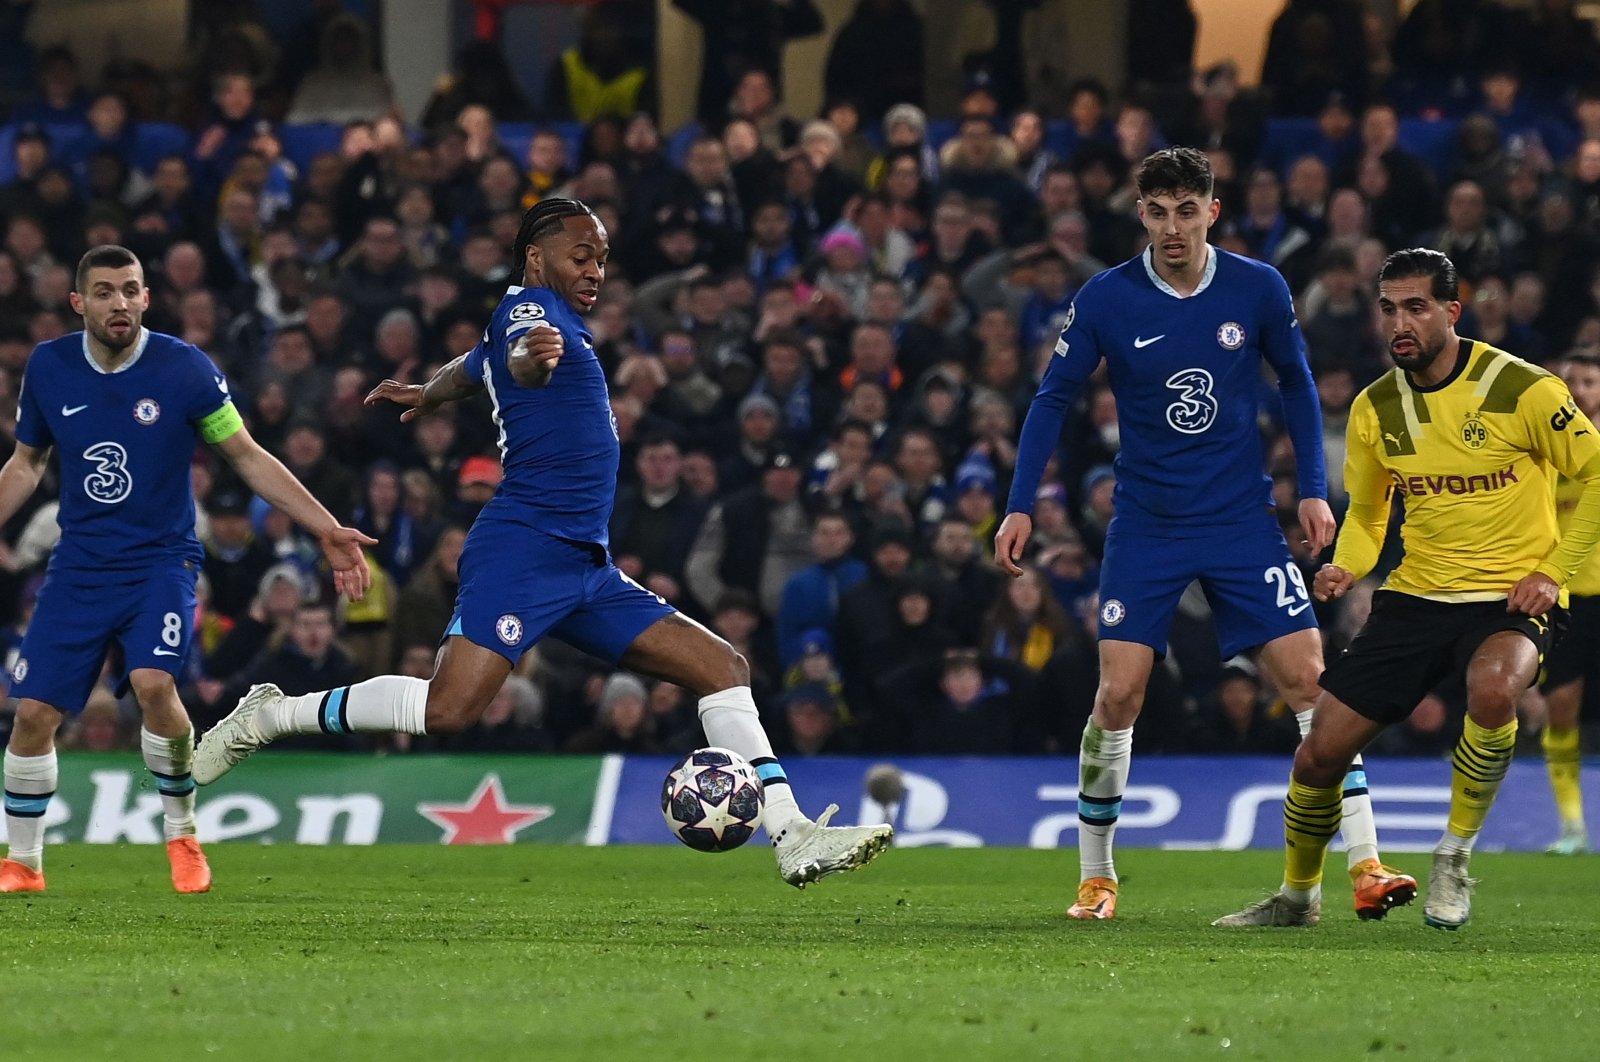 Chelsea&#039;s English midfielder Raheem Sterling scores the opening goal during the UEFA Champions League round of 16 second-leg football match against Borussia Dortmund at Stamford Bridge, London, UK., March 7, 2023. (AFP Photo)